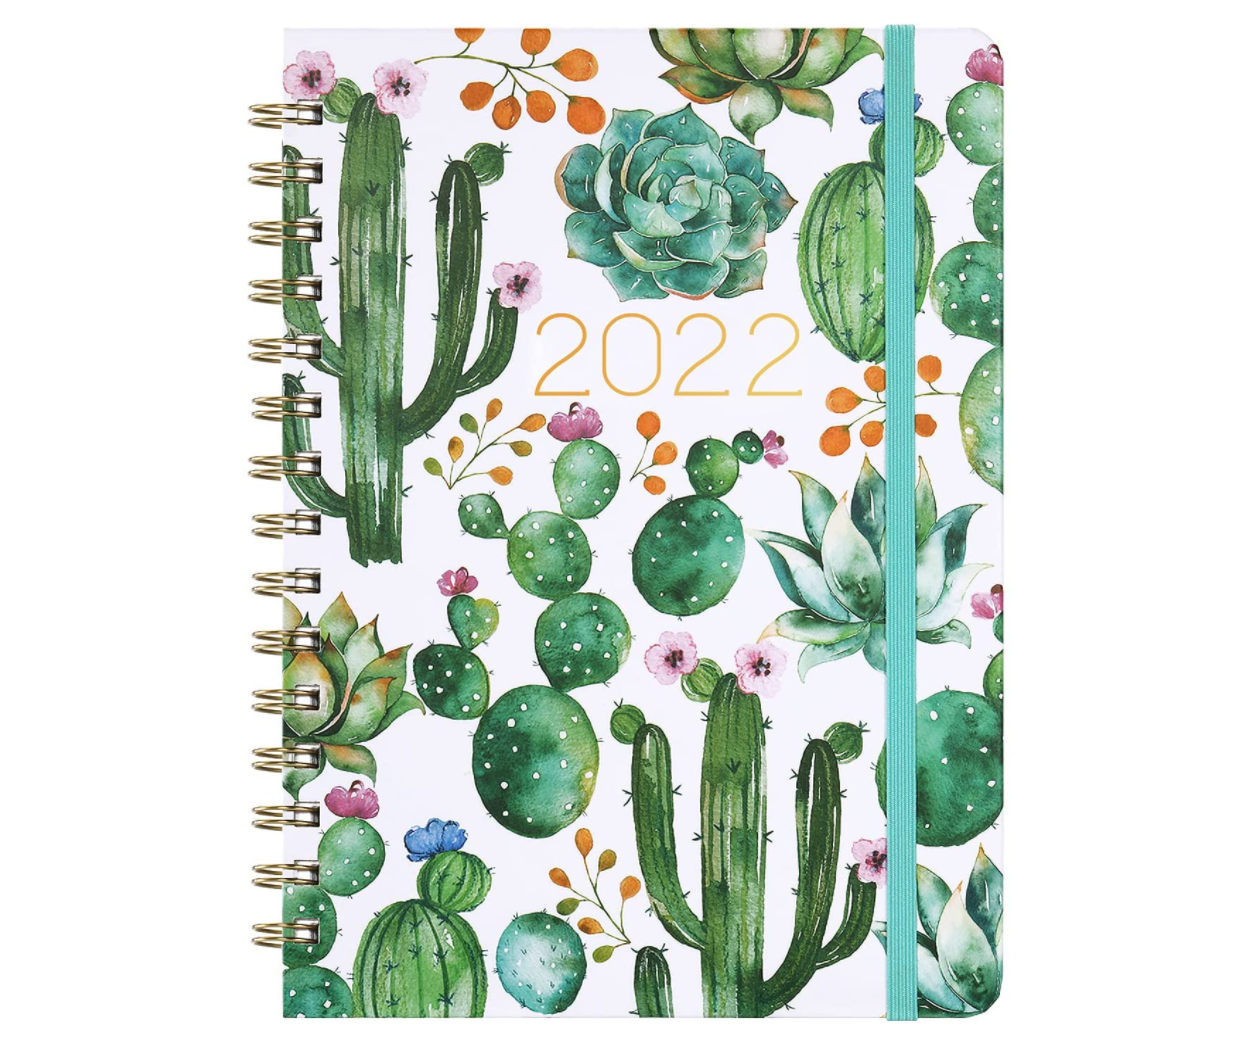 Strong Twin 2022 Planner 2022 Weekly Monthly Planner with Tabs Inner Pocket Dec 2022 Wire Binding Jan 2022 Flexible Hardcover Improving Your Time Management Skill 8.5 x 6.4 